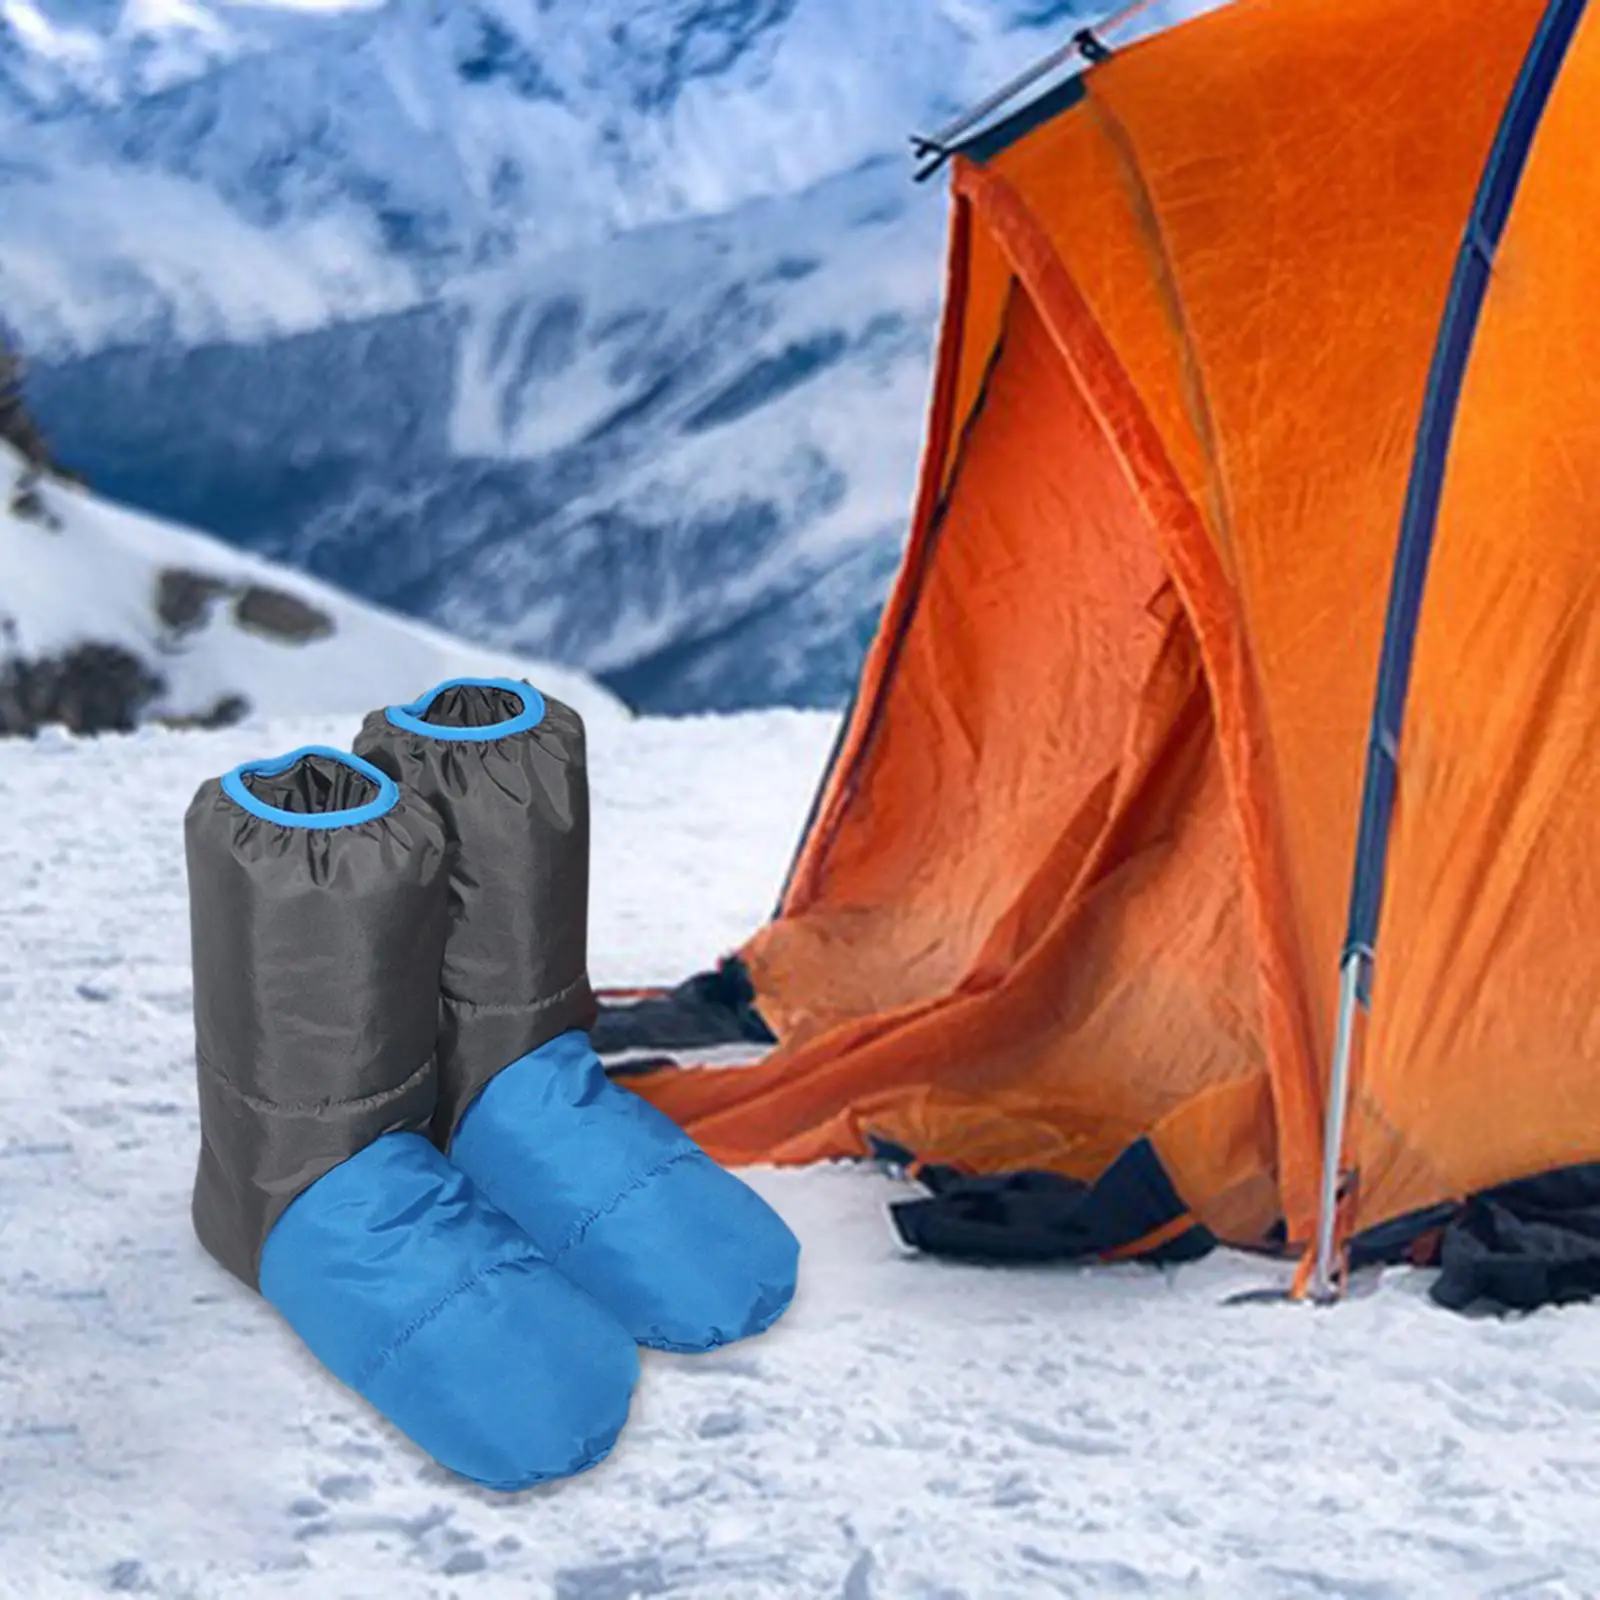 Down Booties Down Shoes Warm Boots Soft Feet Cover Socks Down Boots for Camping Hiking Backpacking Snowboard